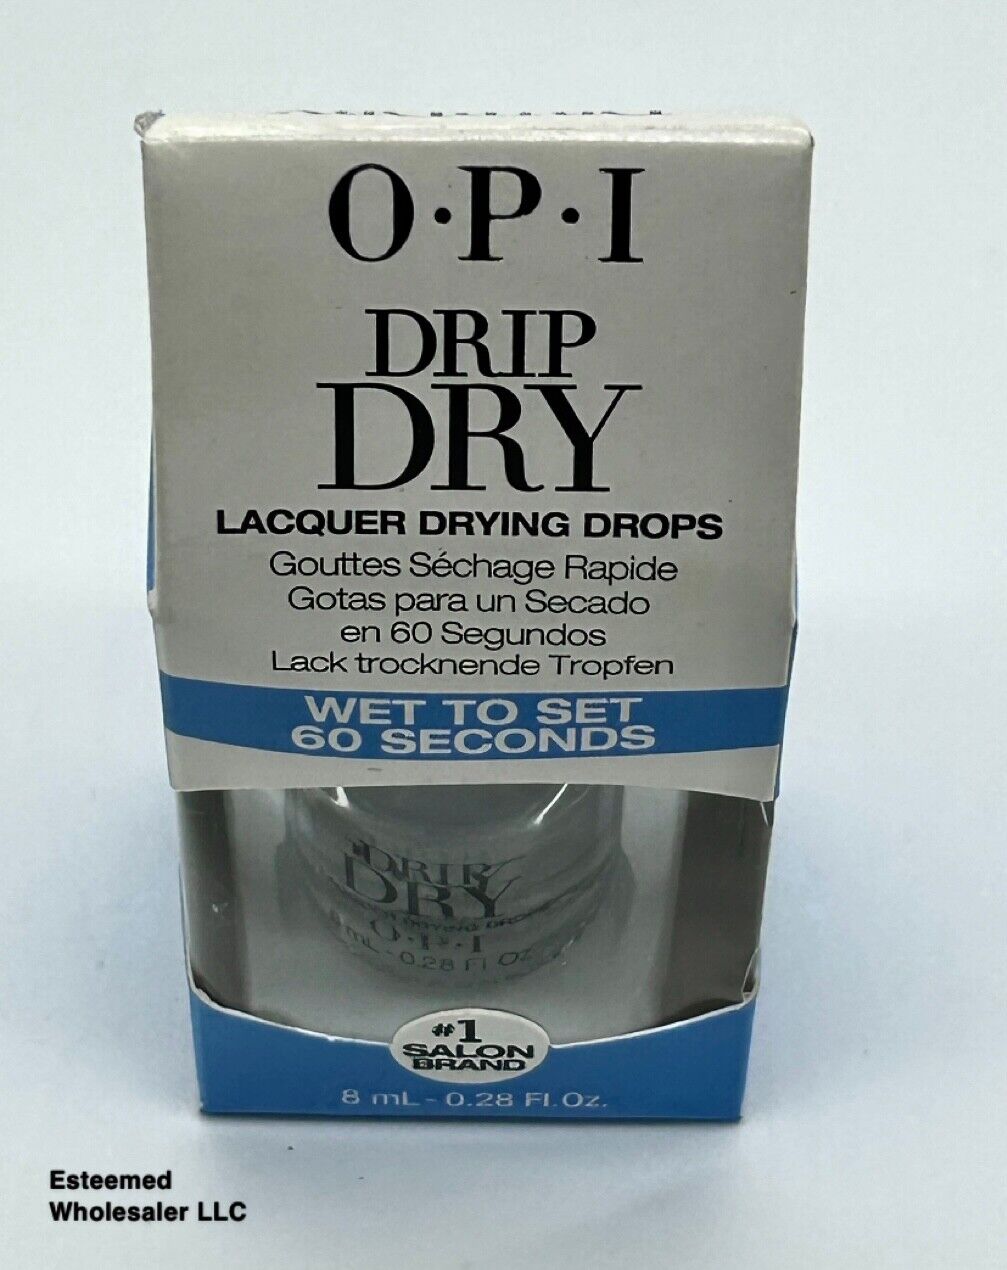 2 - OPI Drip Dry Lacquer Drying Drops Wet To Set 60 Seconds 0.28oz